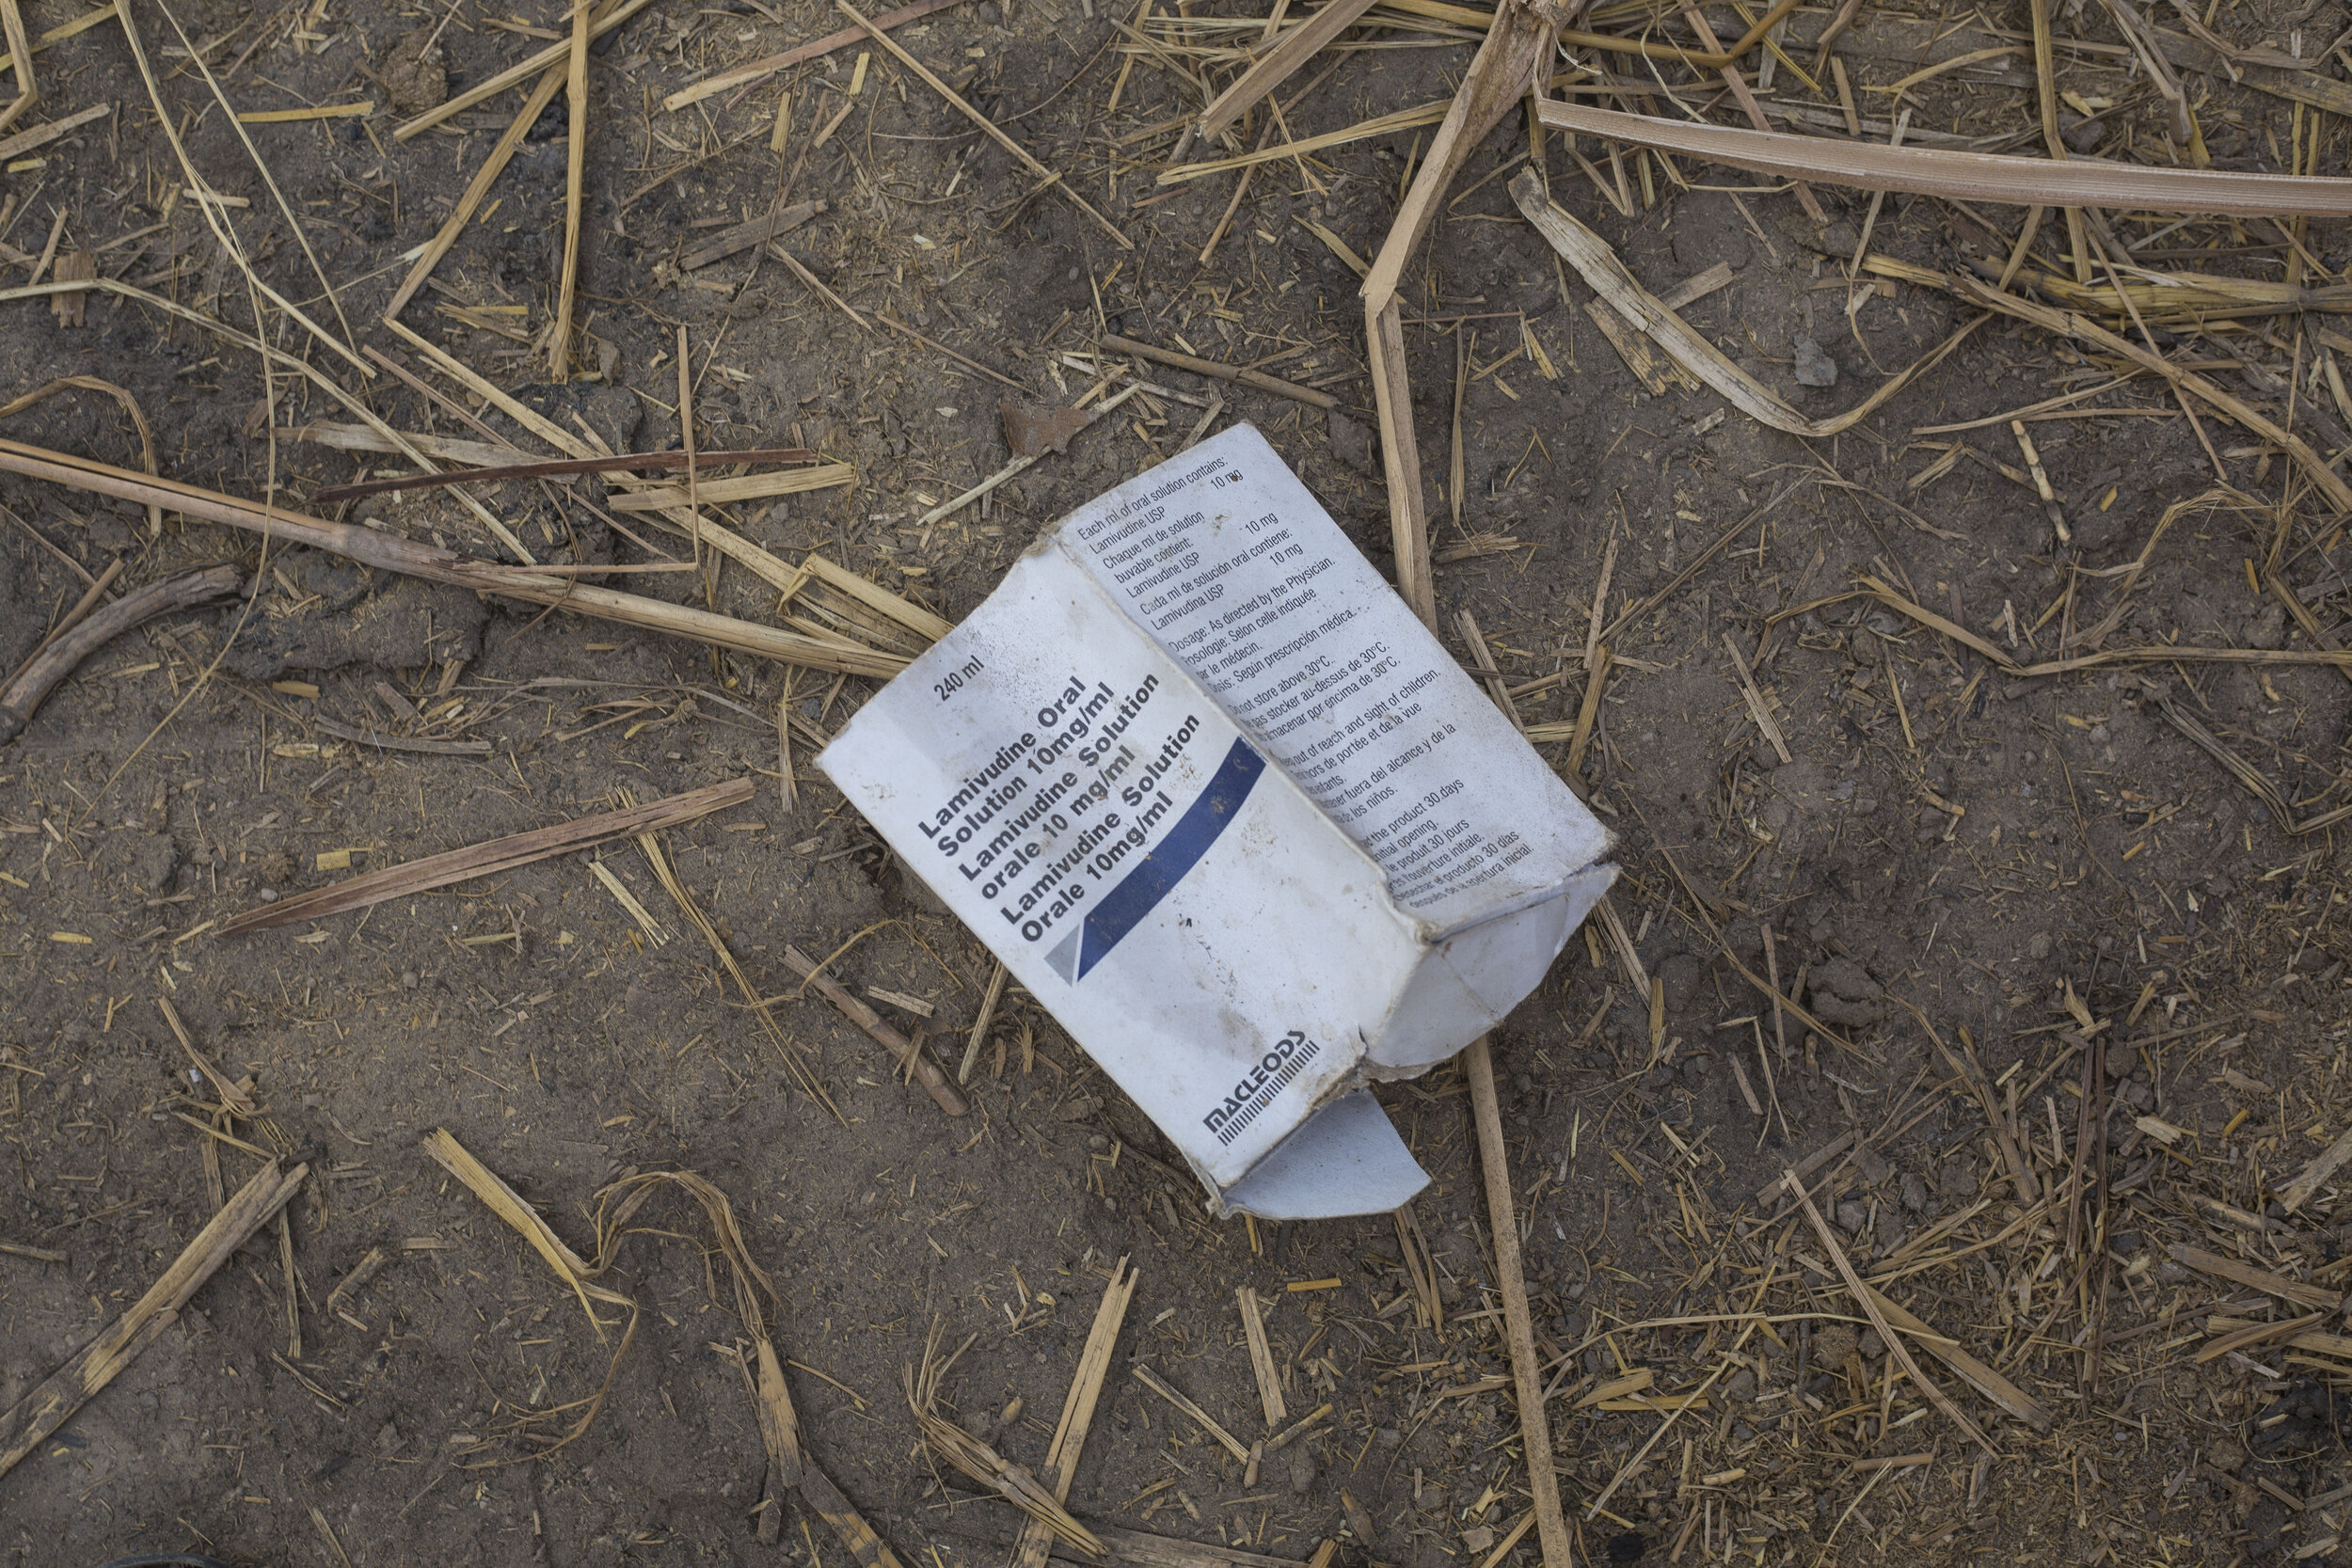  An empty box of HIV medication on the floor in Subhani Shar village, around 8 km from Ratodero where at least 23 people have been infected with HIV on July 25, 2019 in Sind, Pakistan.  